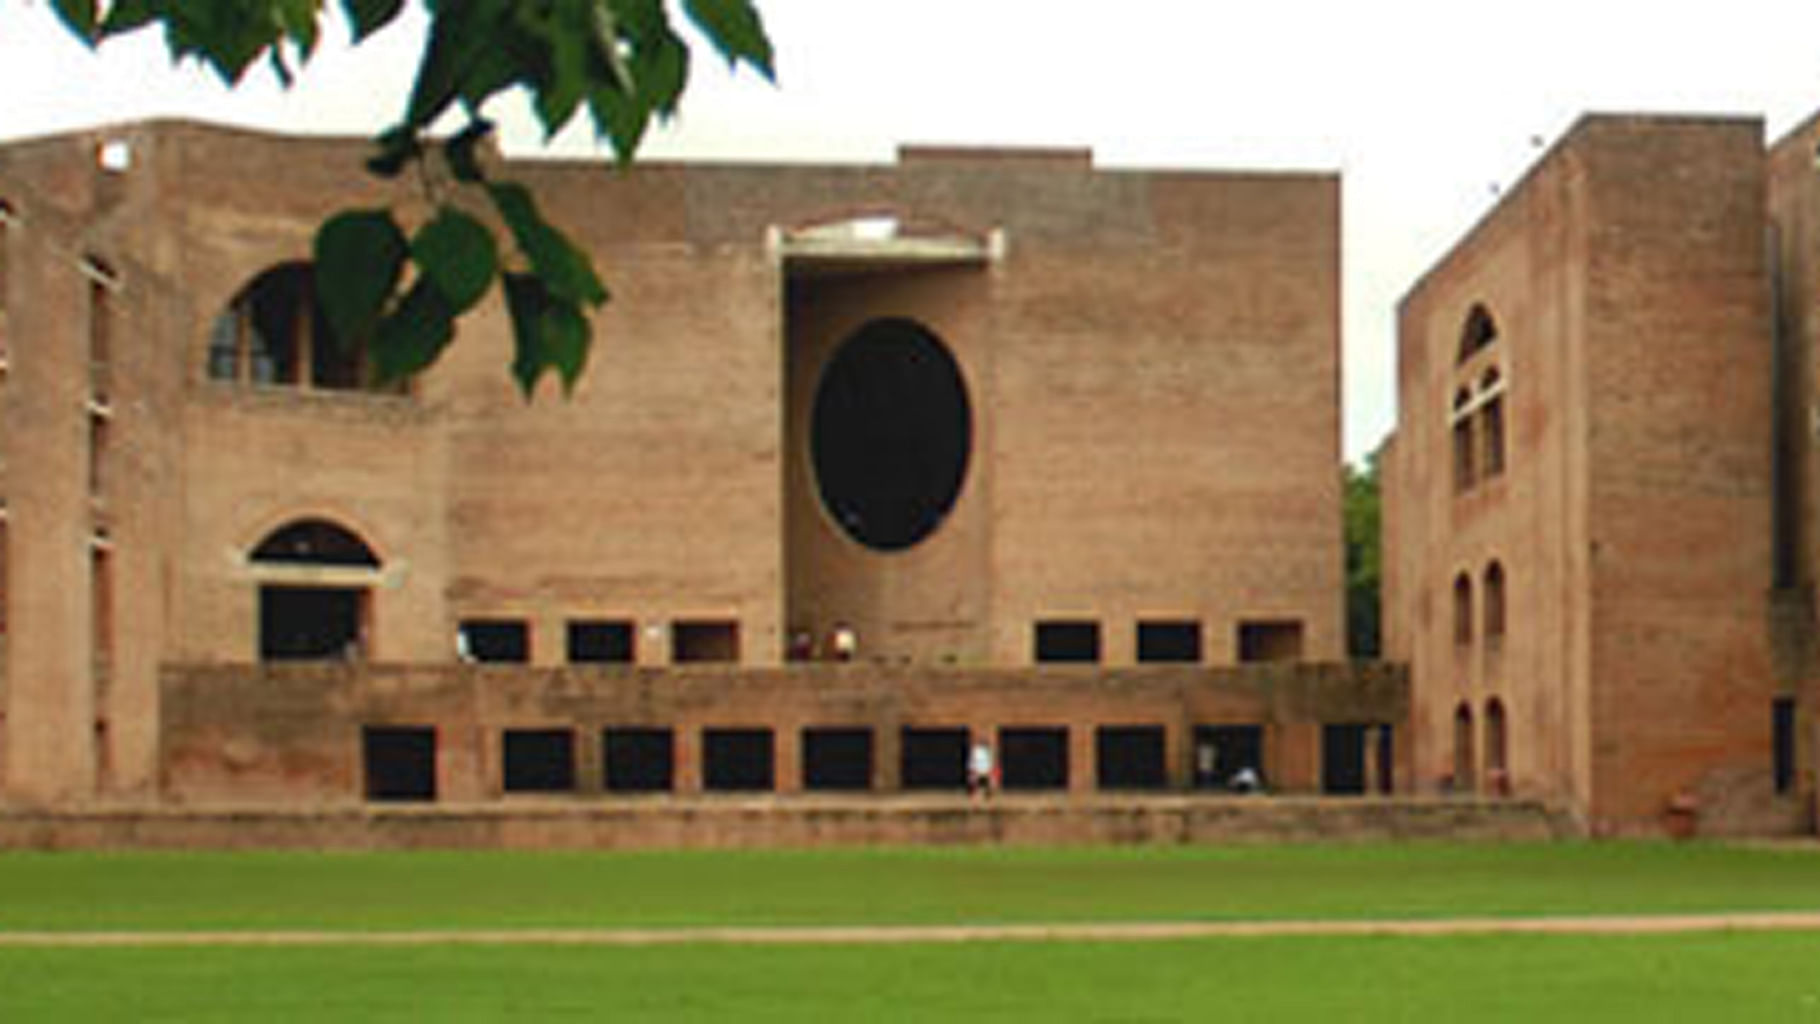 Campus of Indian Institute of Management. (Photo: <a href="http://www.iimahd.ernet.in/">IIM-A</a>)